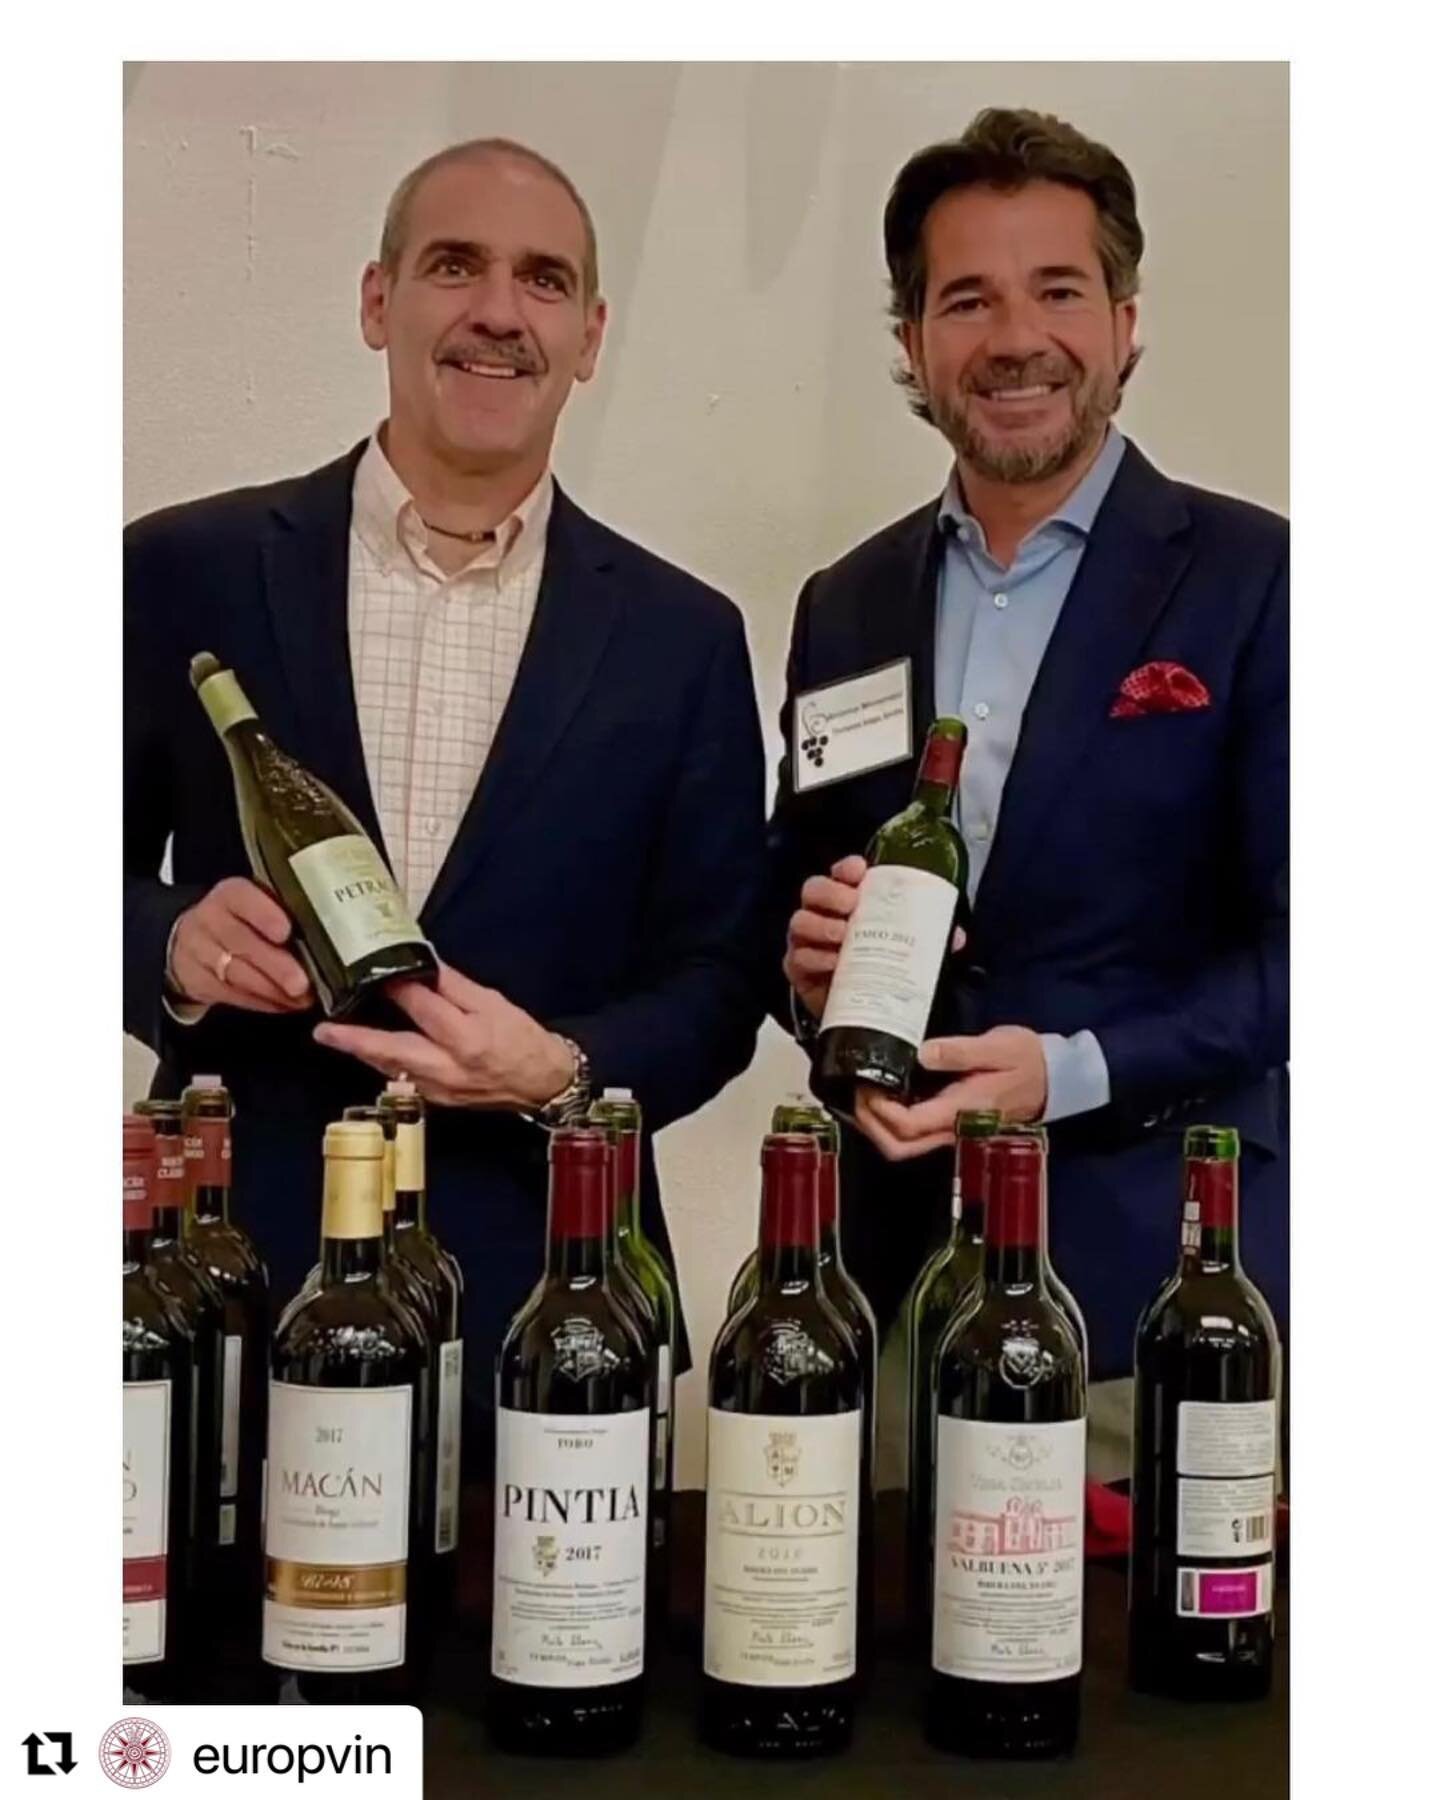 #Repost @europvin with @make_repost
・・・
General Manager of @temposvegasicilia, Antonio Men&eacute;ndez, and @europvin_jim hard at work at today&rsquo;s @bowlerwine tasting event! 🍷